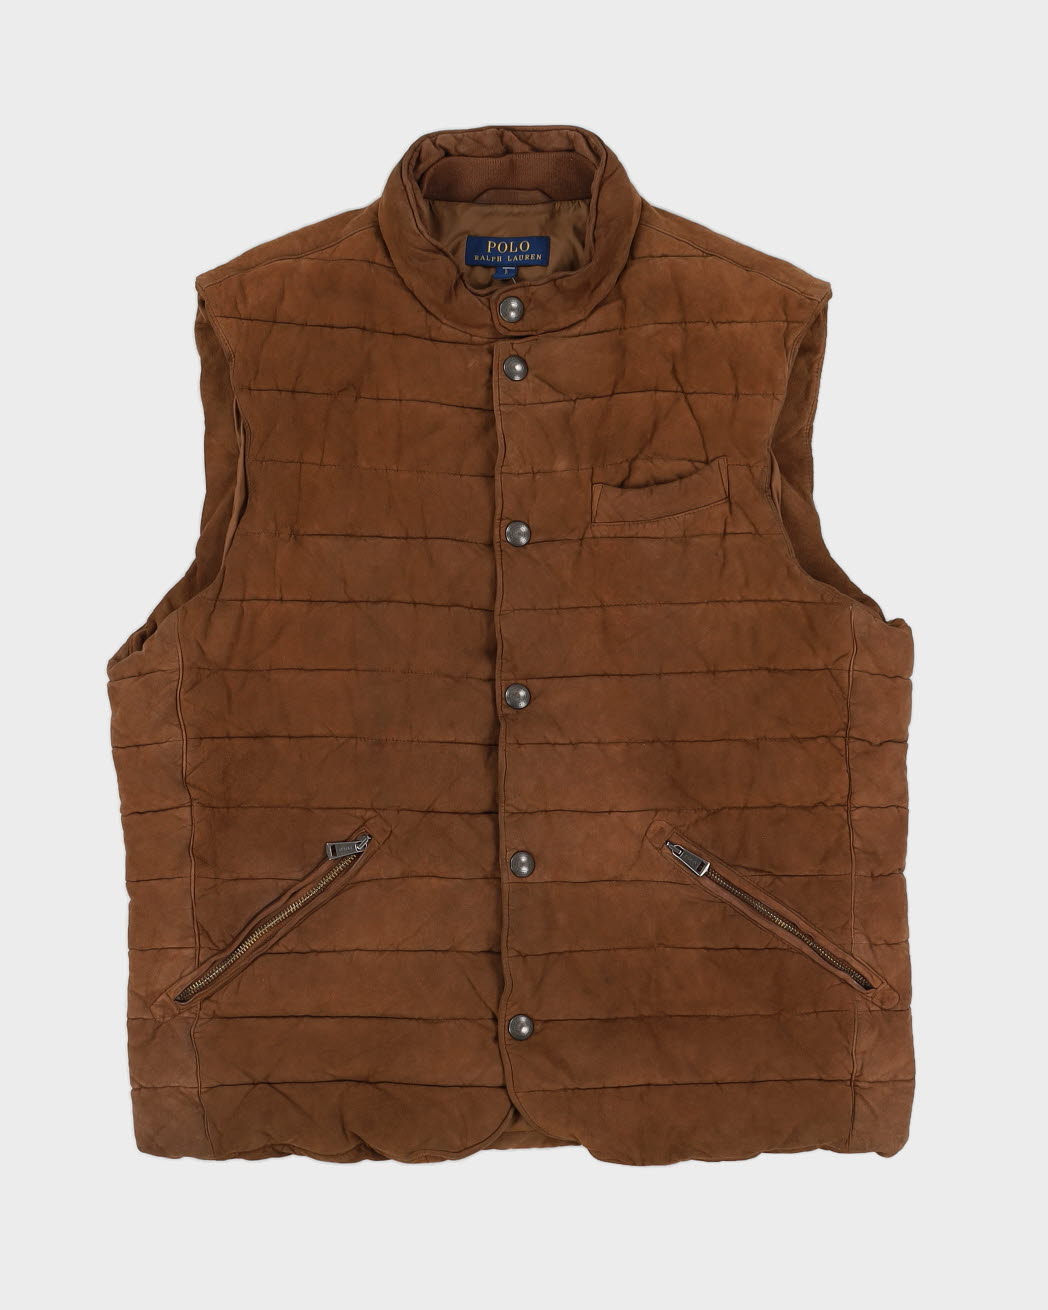 Polo Ralph Lauren Quilted Suede Brown Puffer Gilet - L